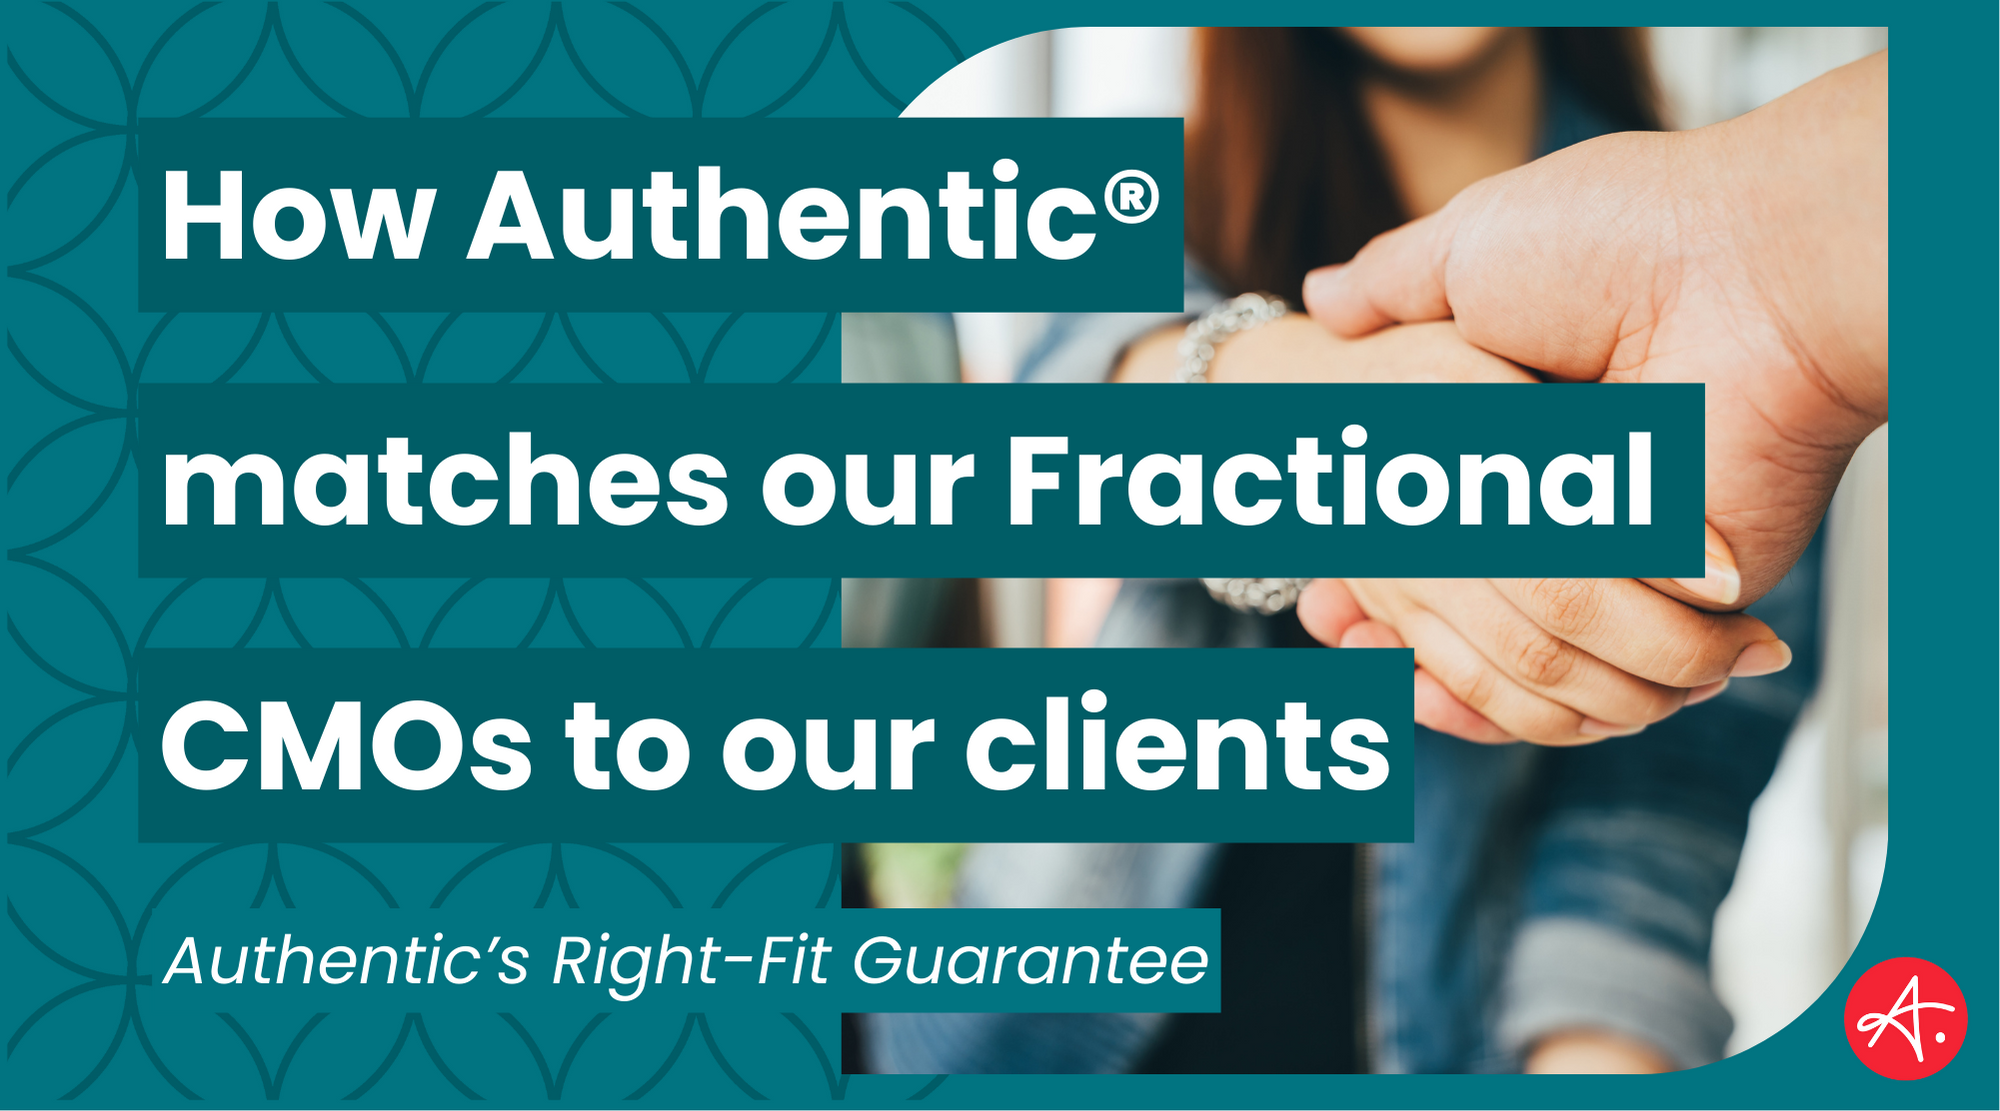 How Authentic® matches our fractional CMOs to our clients